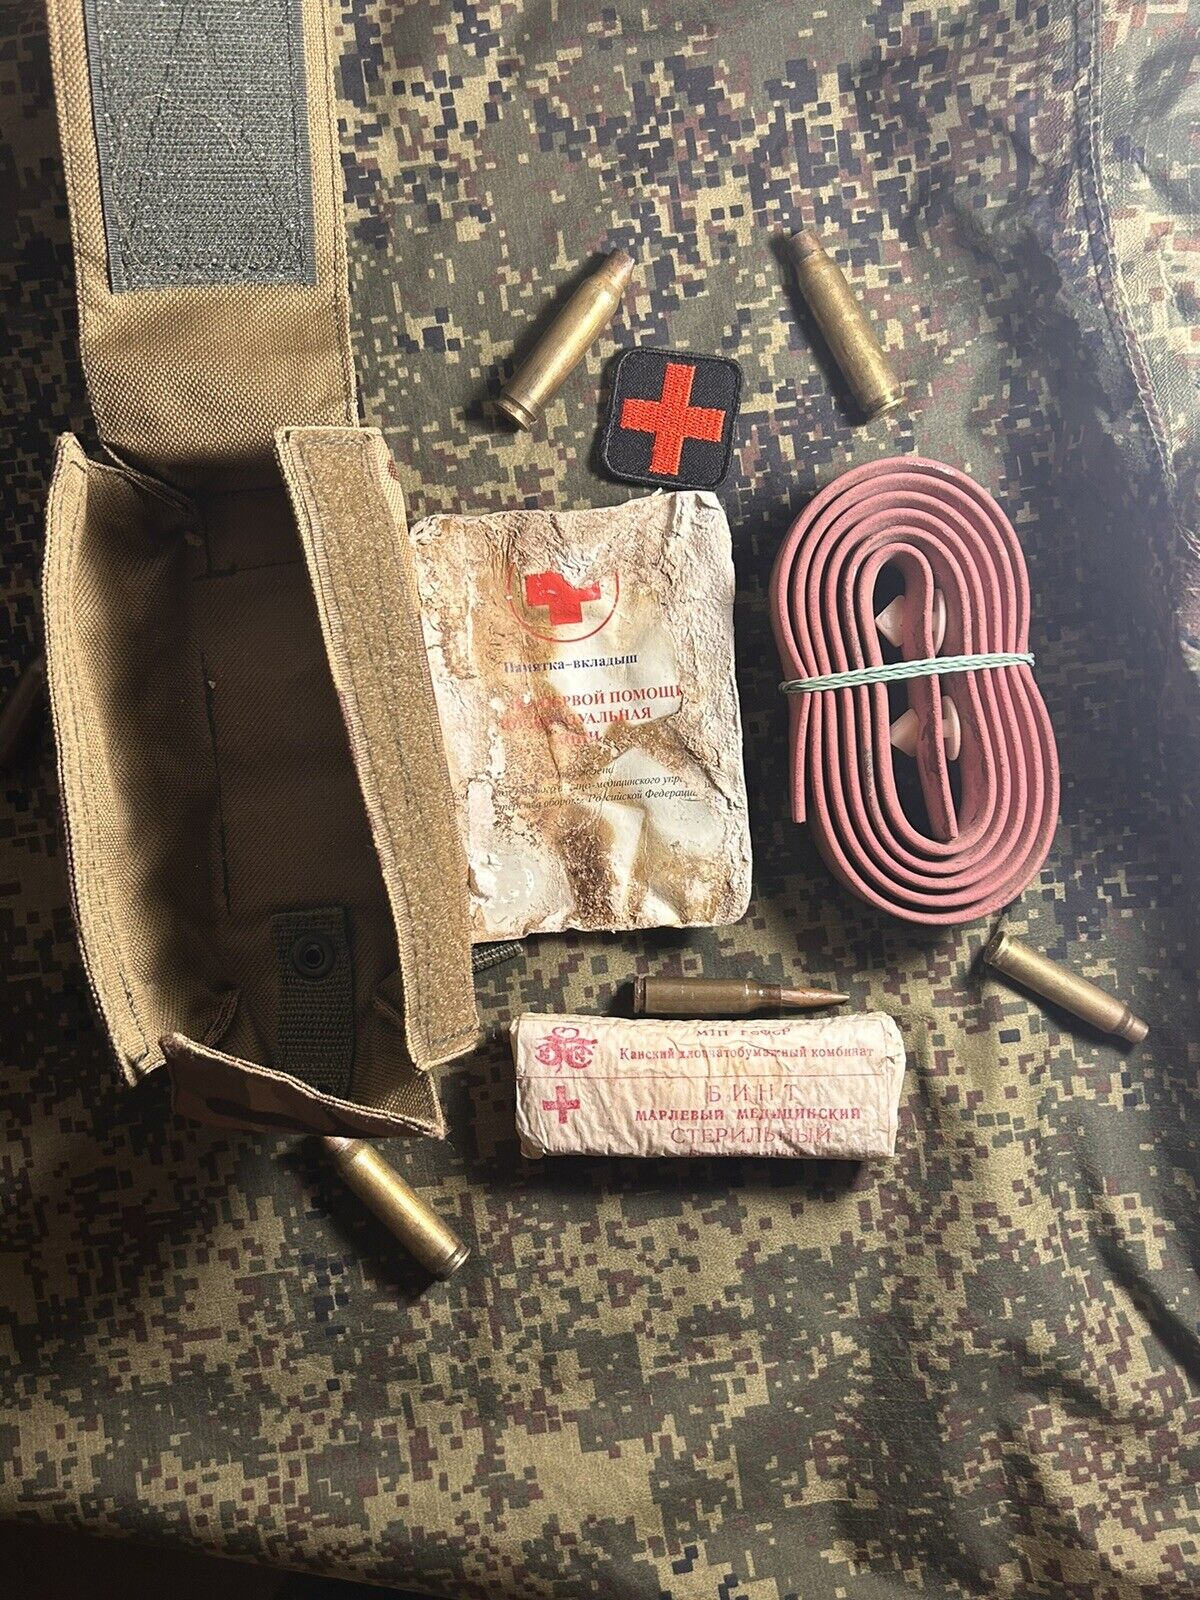 Russian military first aid kit. soldier's personal first aid kit from Avdeevka